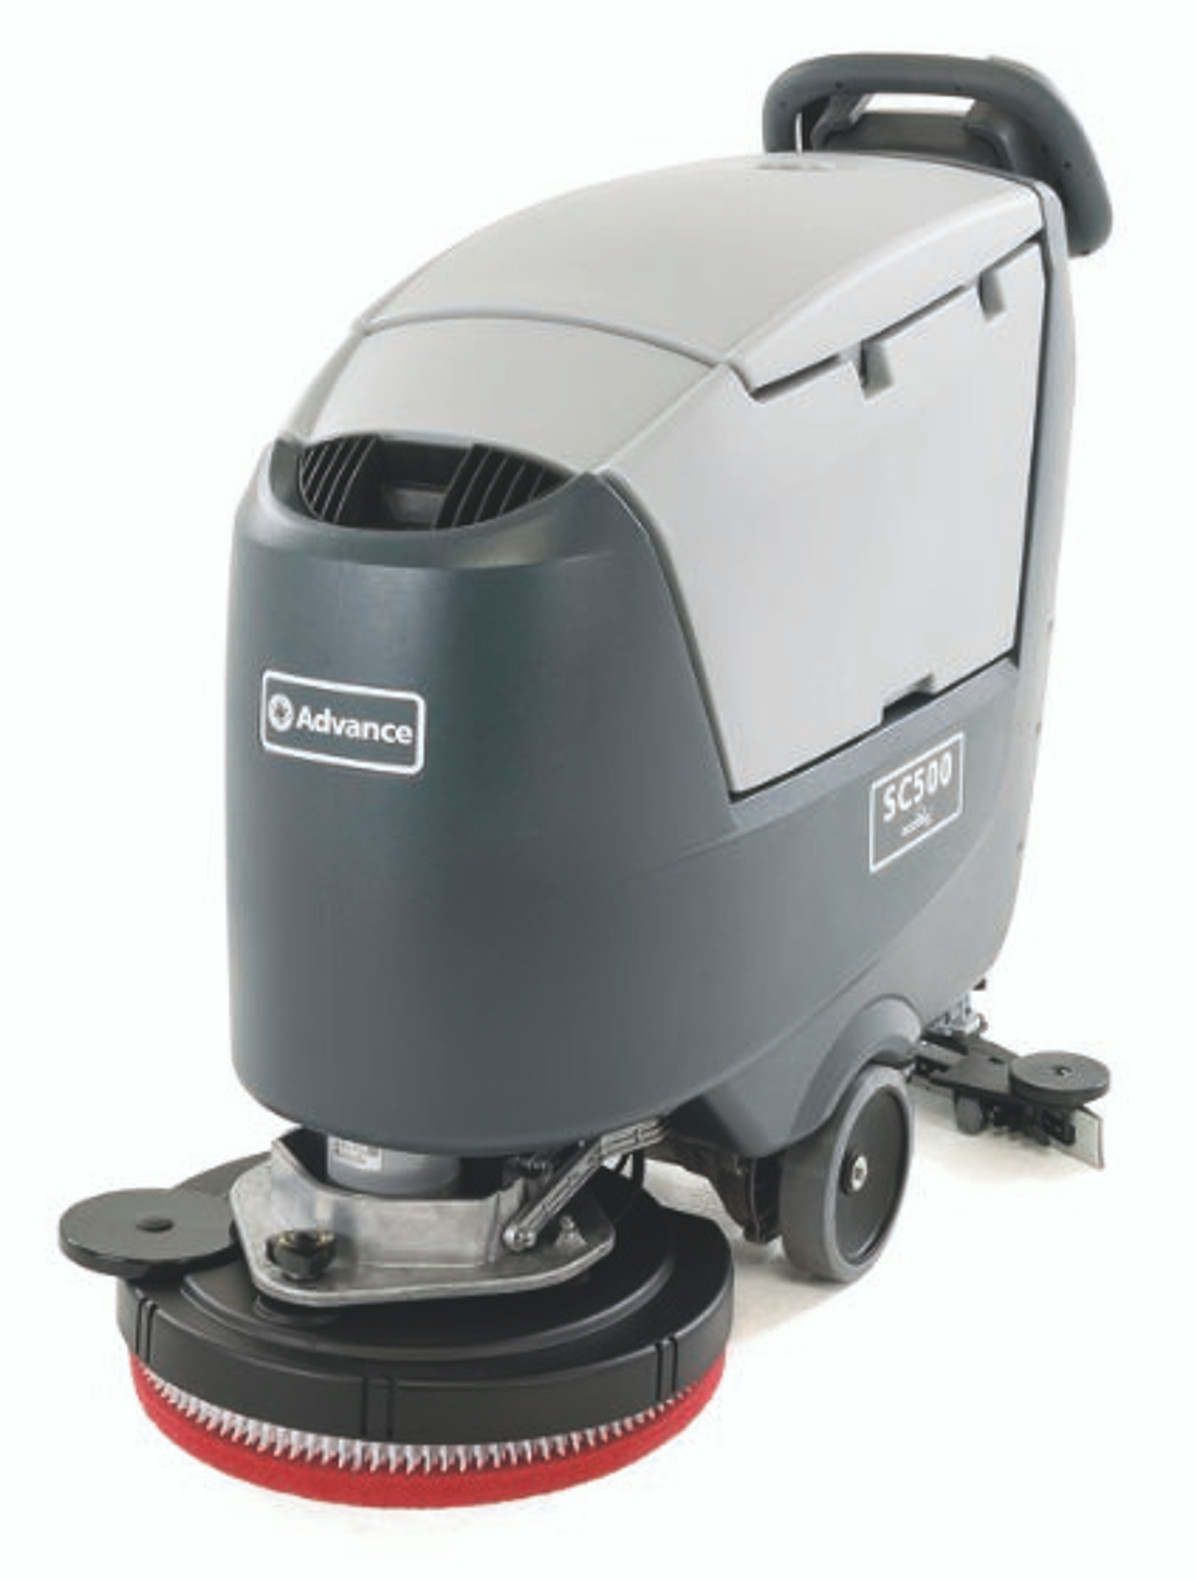 Advance SC500 20D Traction Drive 20 Battery Powered Floor Scrubber- New